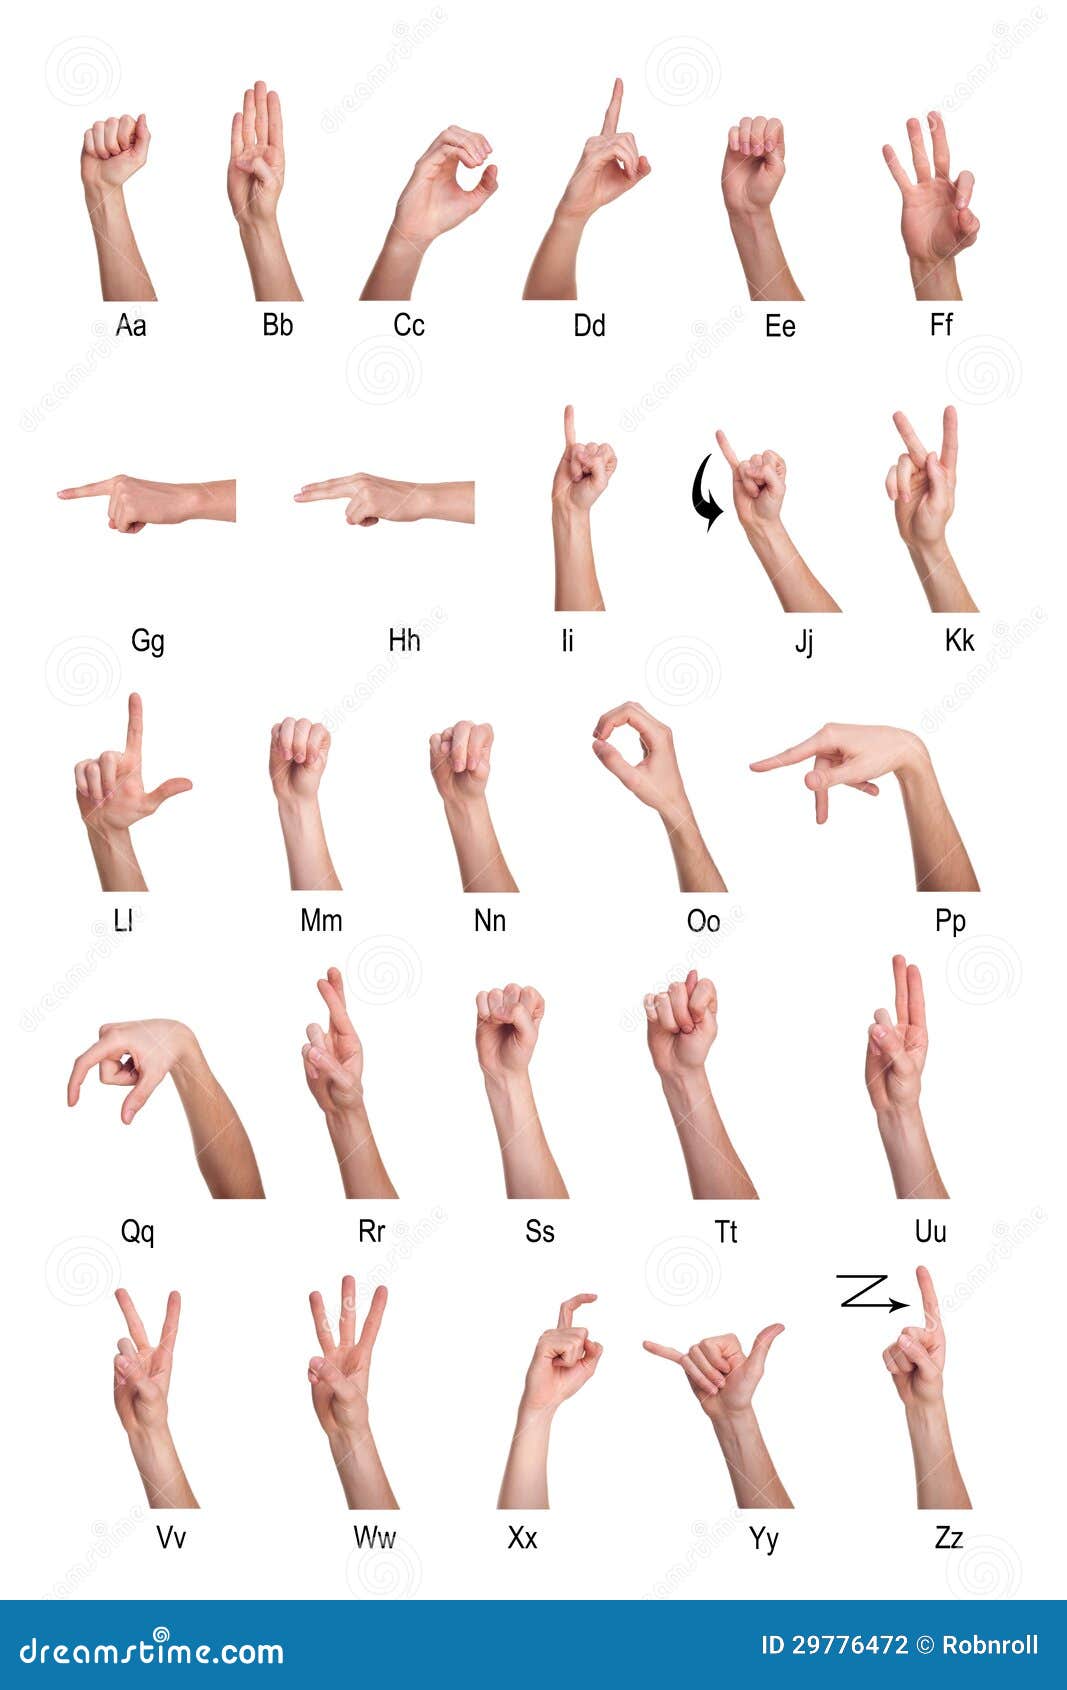 Hand Language Signs – All the hand signs and gestures you need to express exactly how you